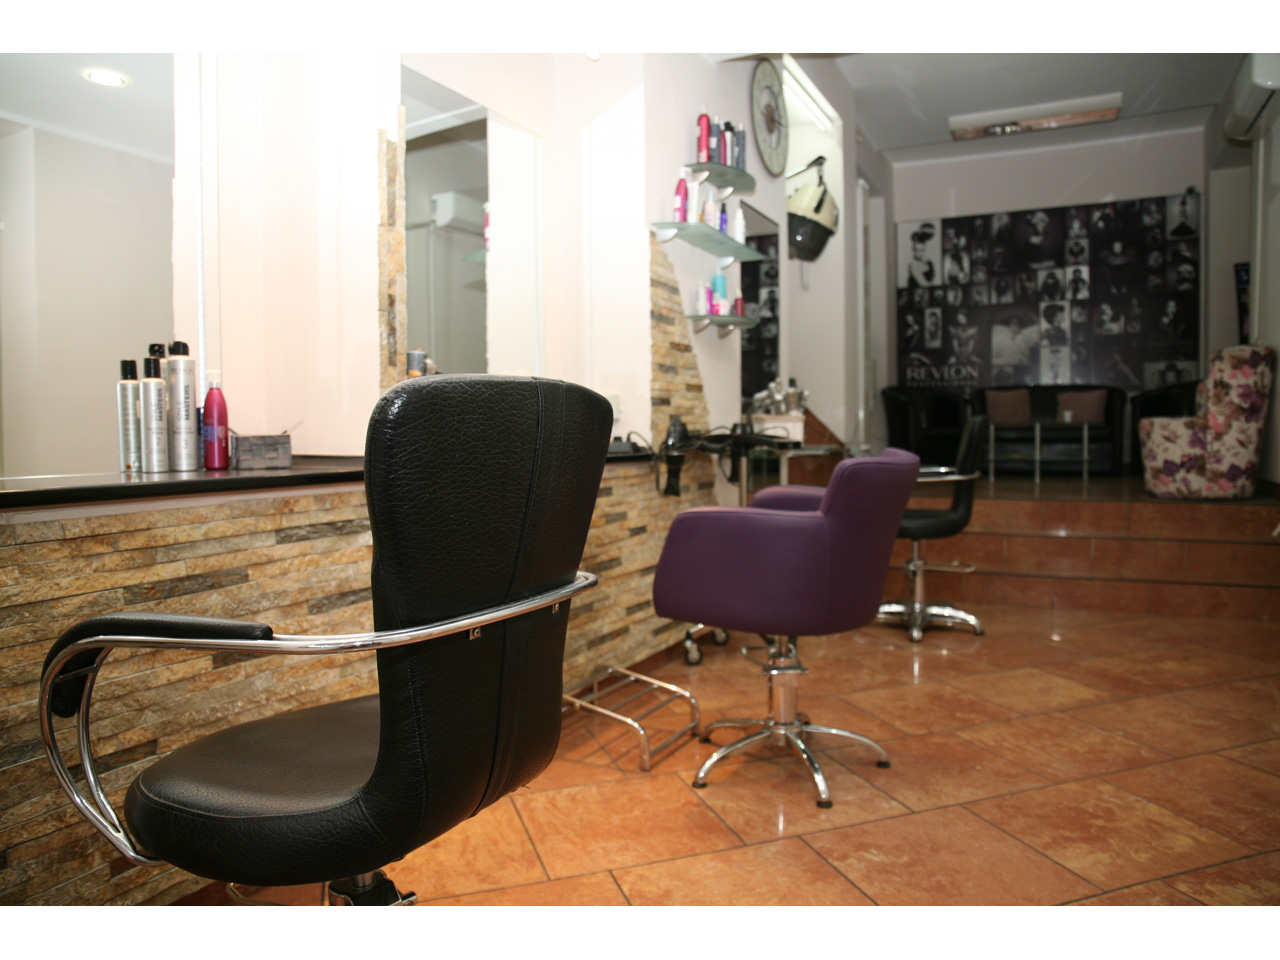 BUBI T - COSMETIC AND HAIRDRESSING SALON Hairdressers Belgrade - Photo 5